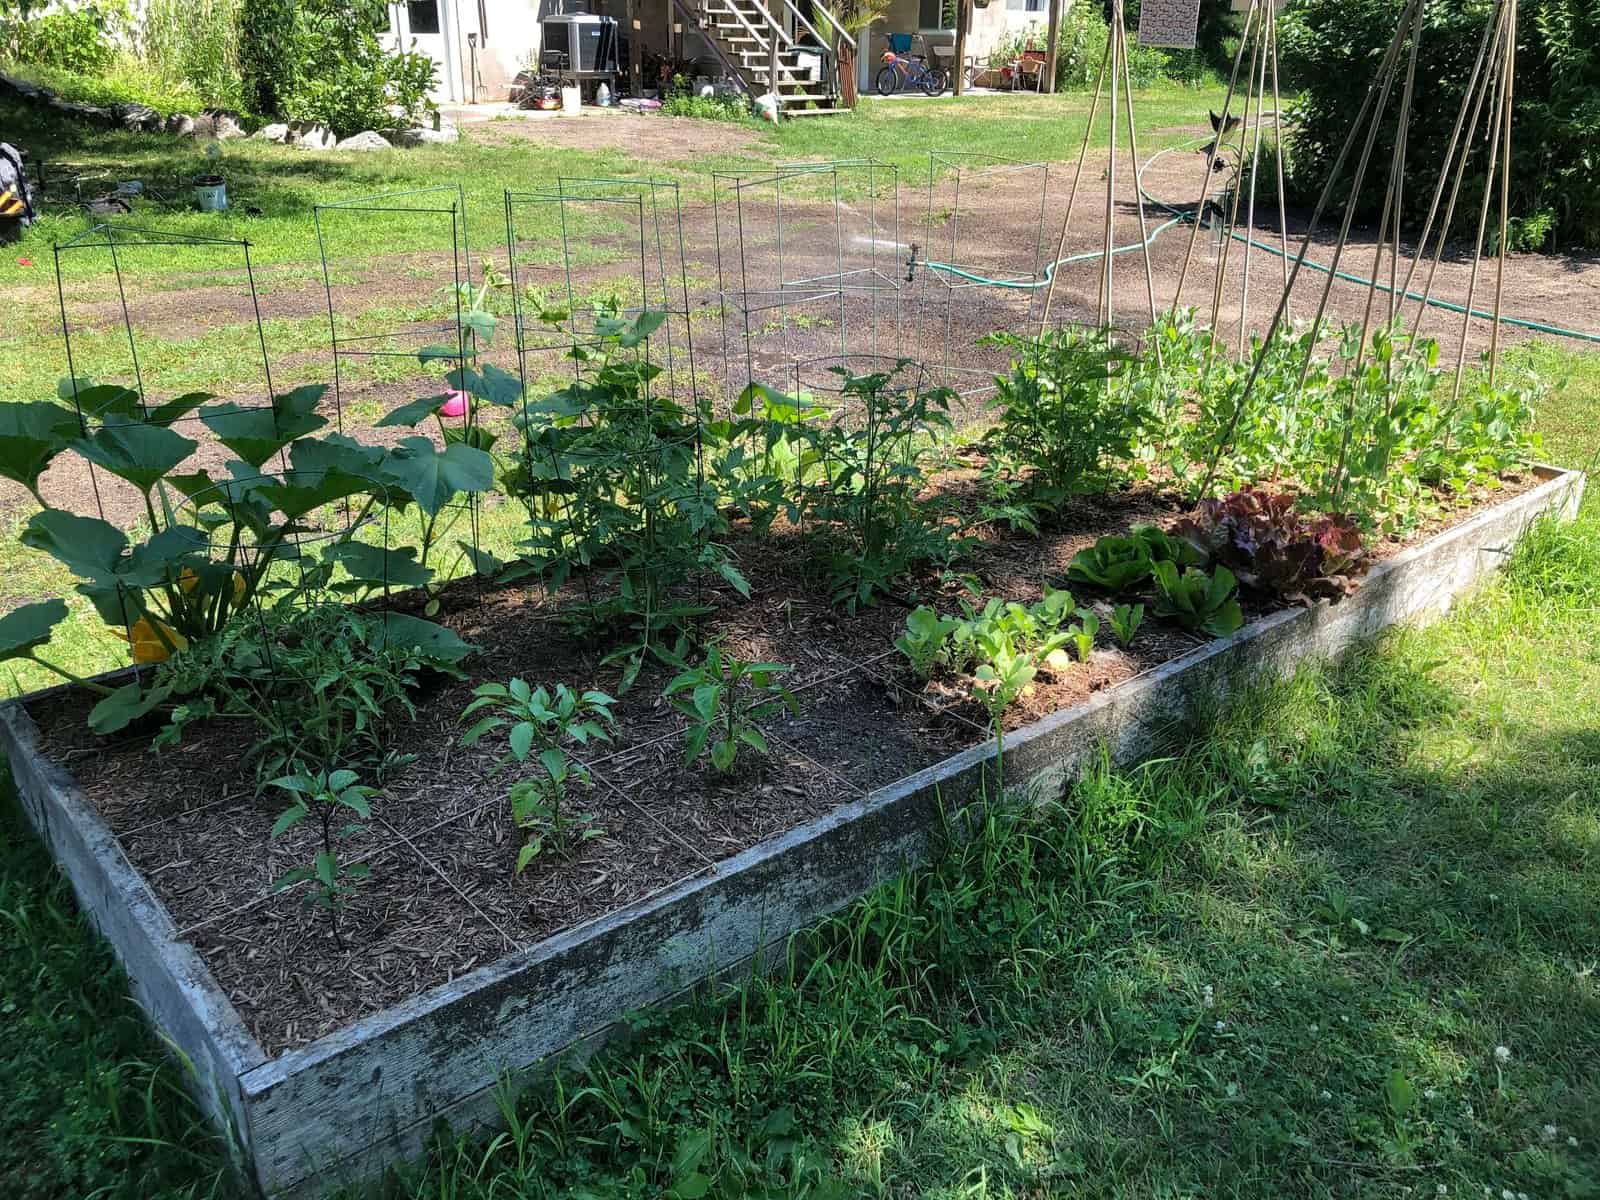 Why I Love Square Foot Gardening